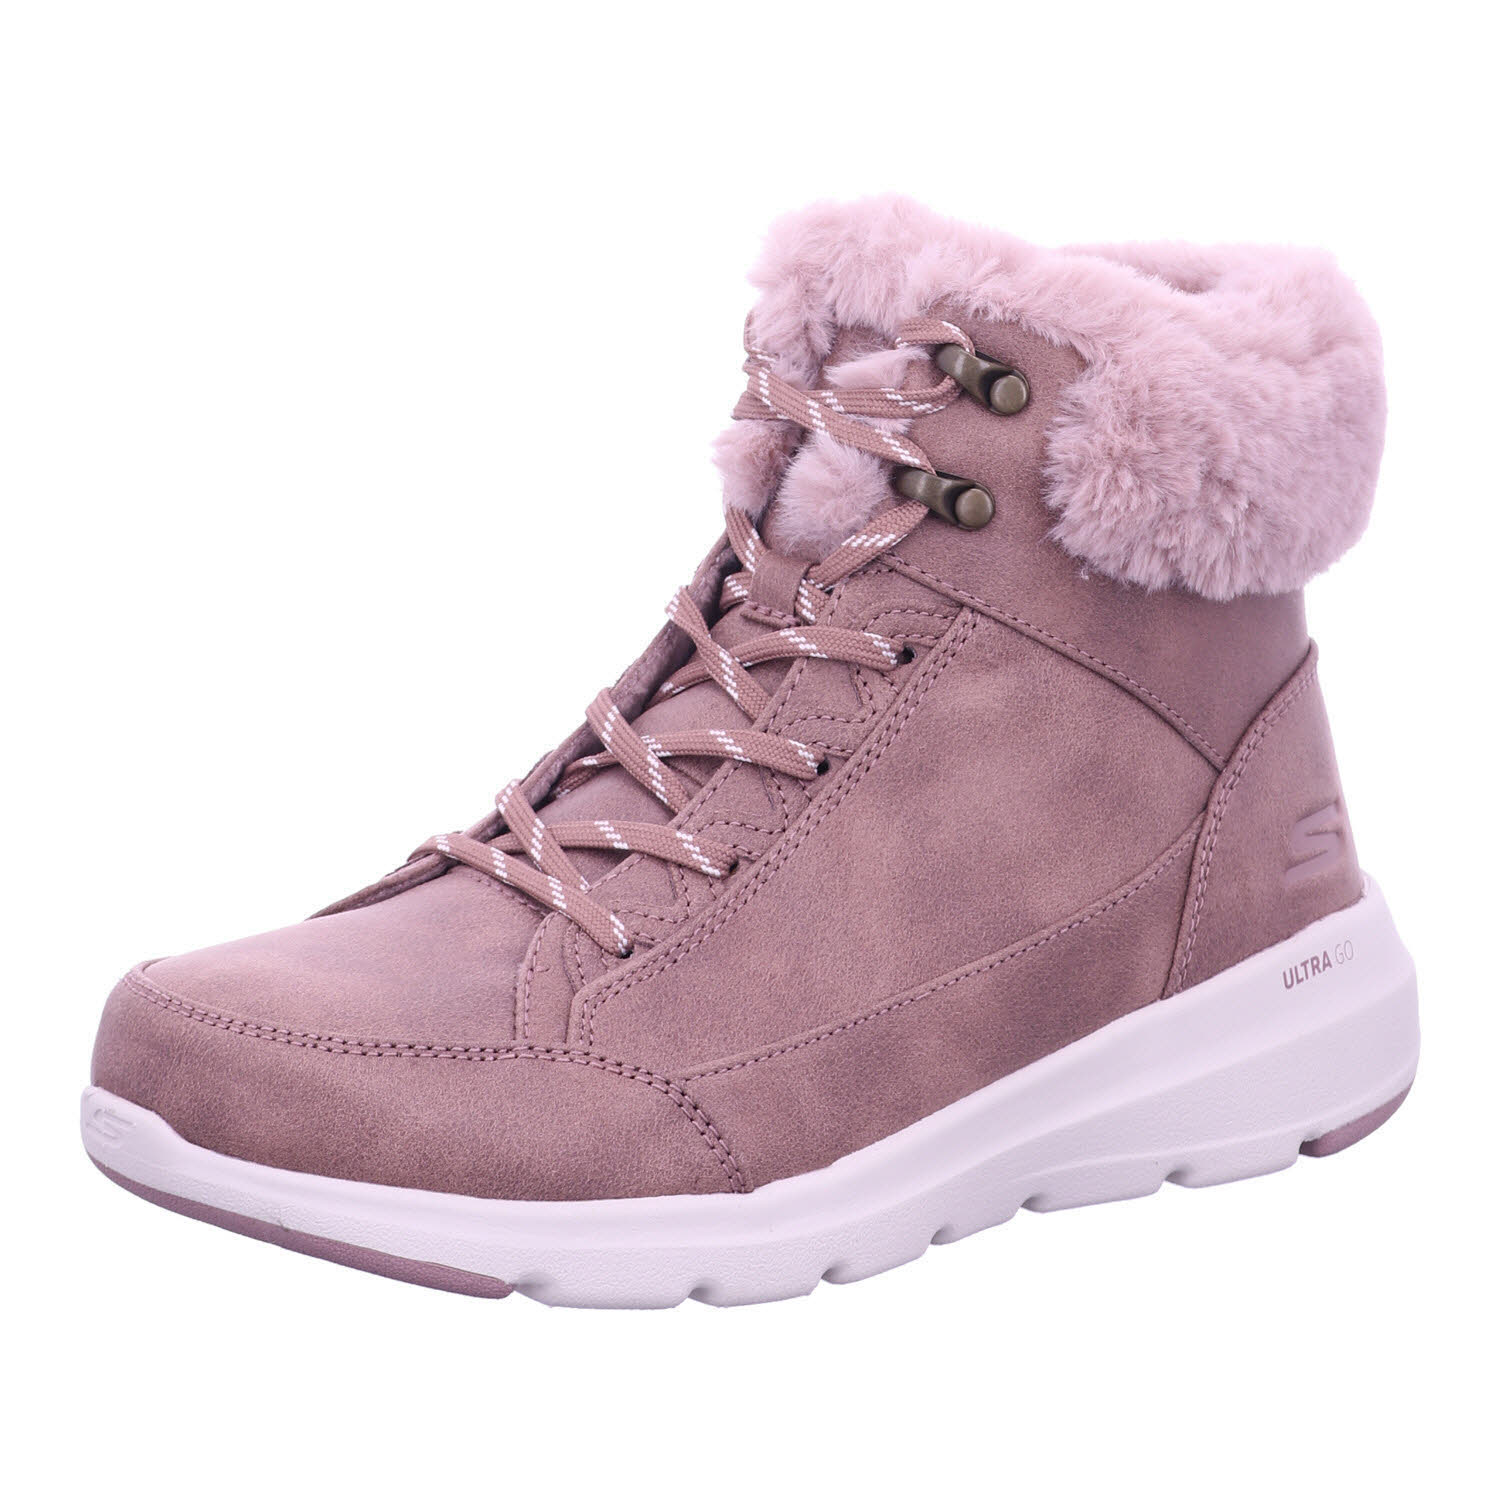 Skechers Boots GLACIAL ULTRA - COZYLY